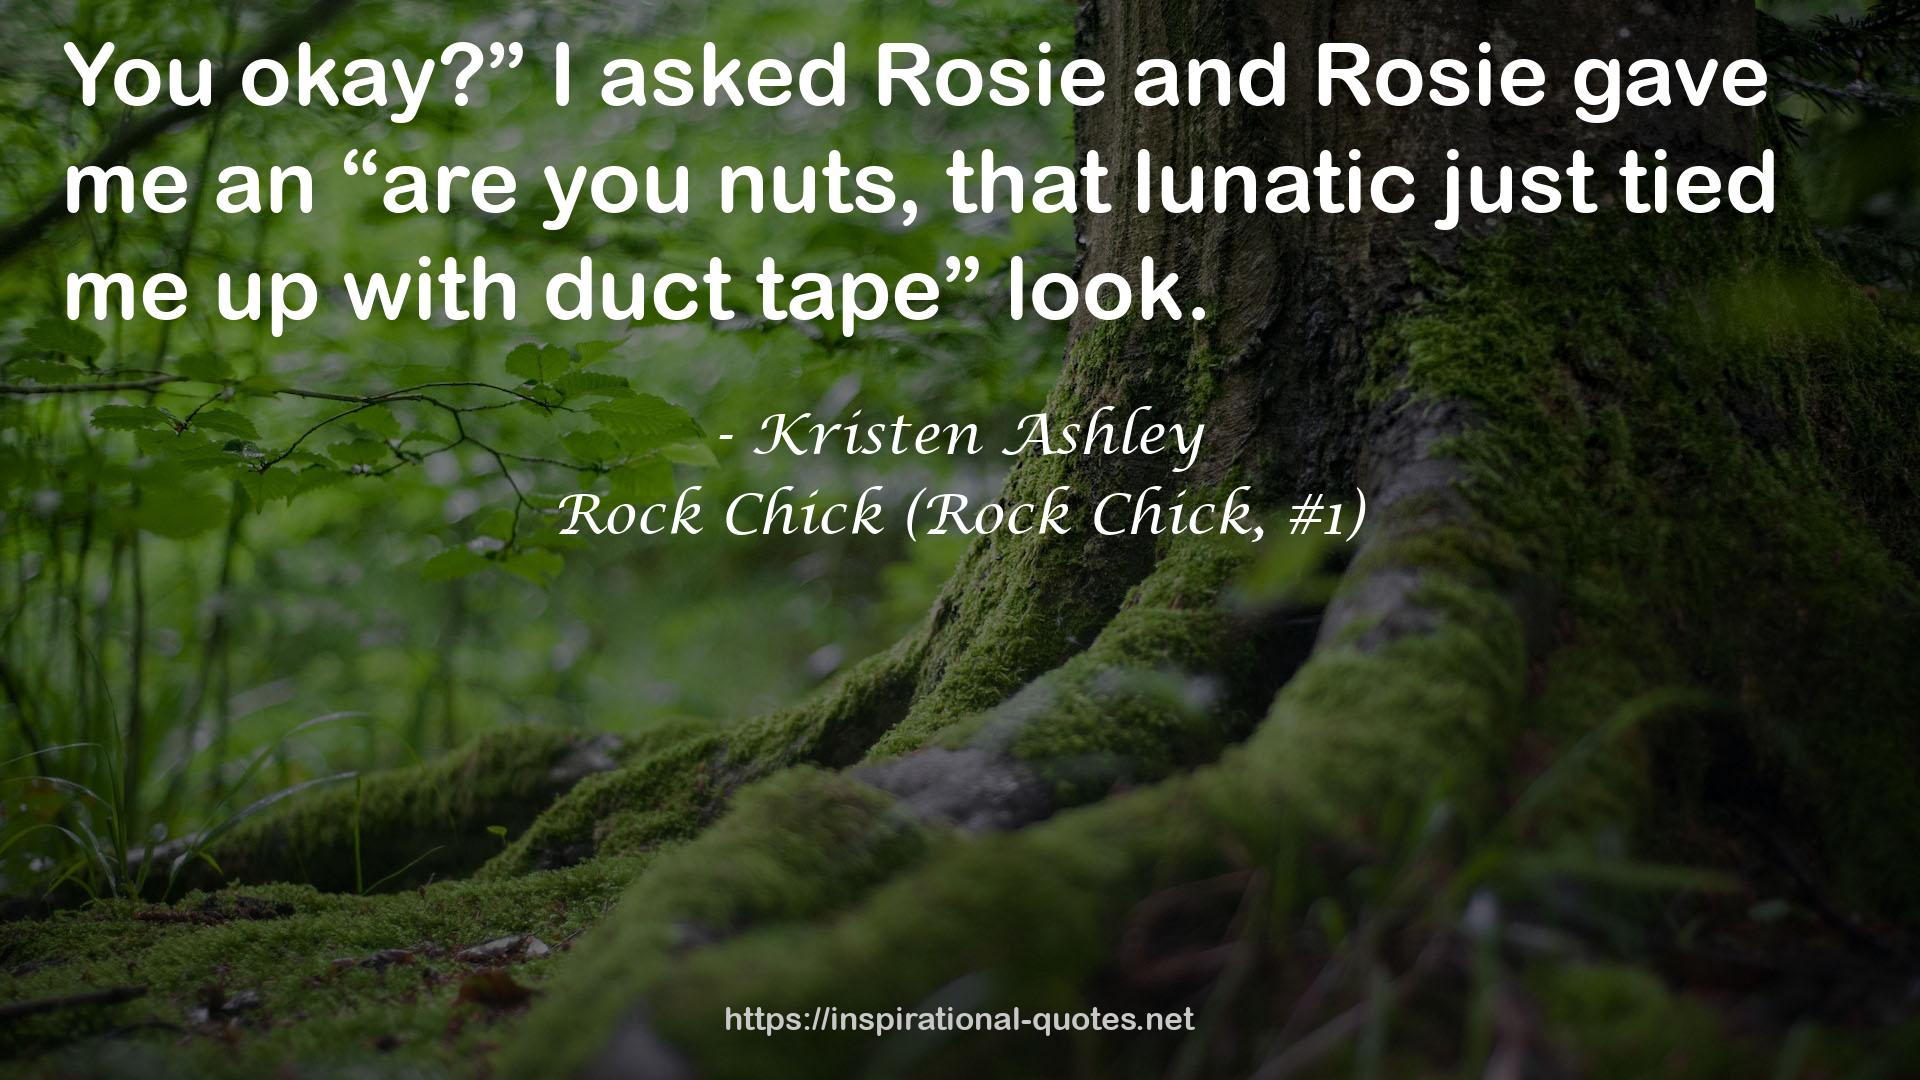 Rock Chick (Rock Chick, #1) QUOTES